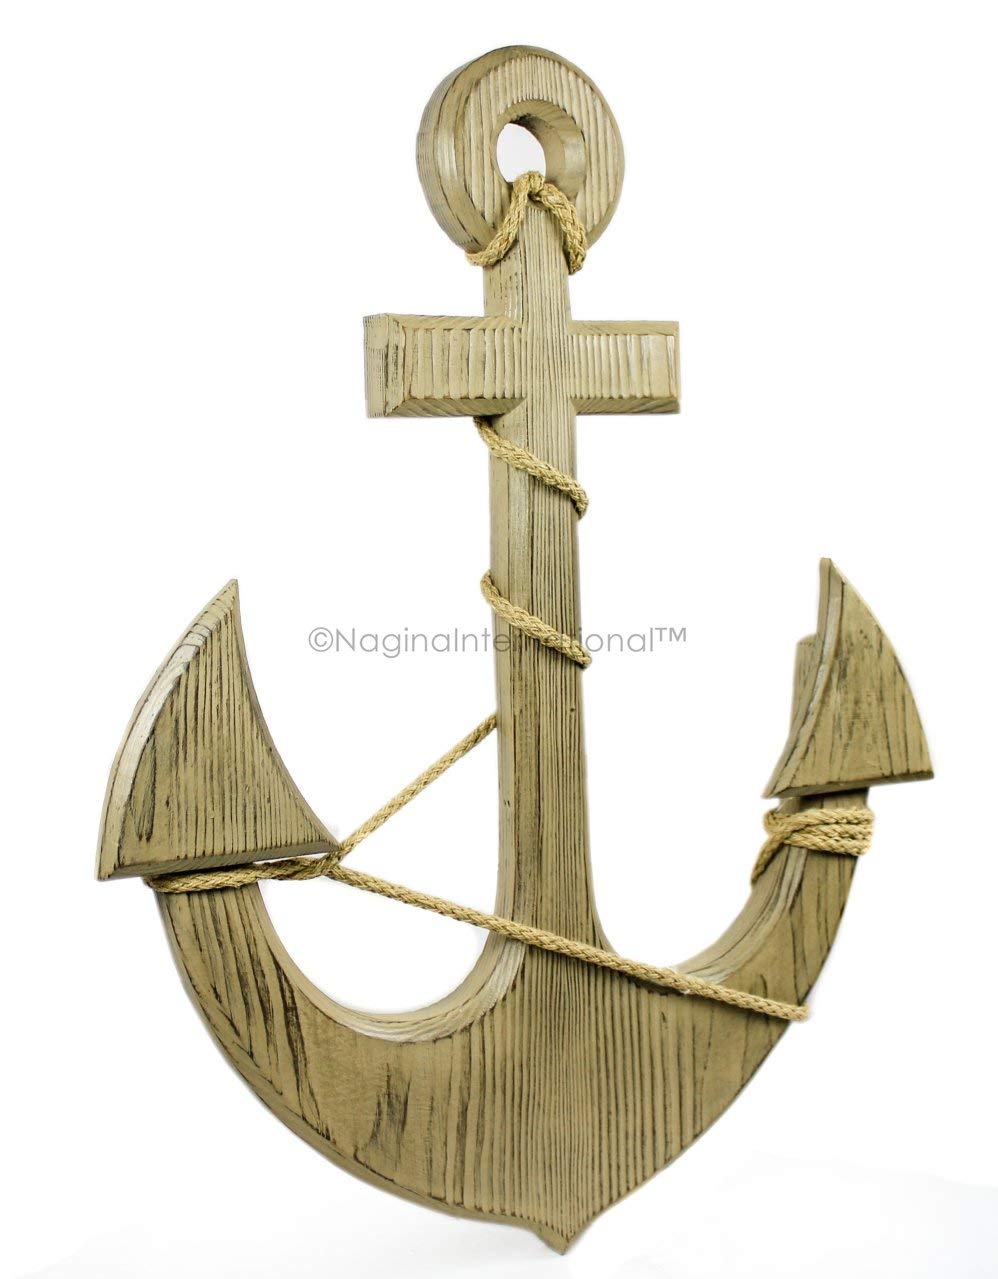 Nagina International 12" Antique Blue Premium Pine Nautical Antique Colored Sailor's Decor Anchor with Vintage Rope | Wall Hanging